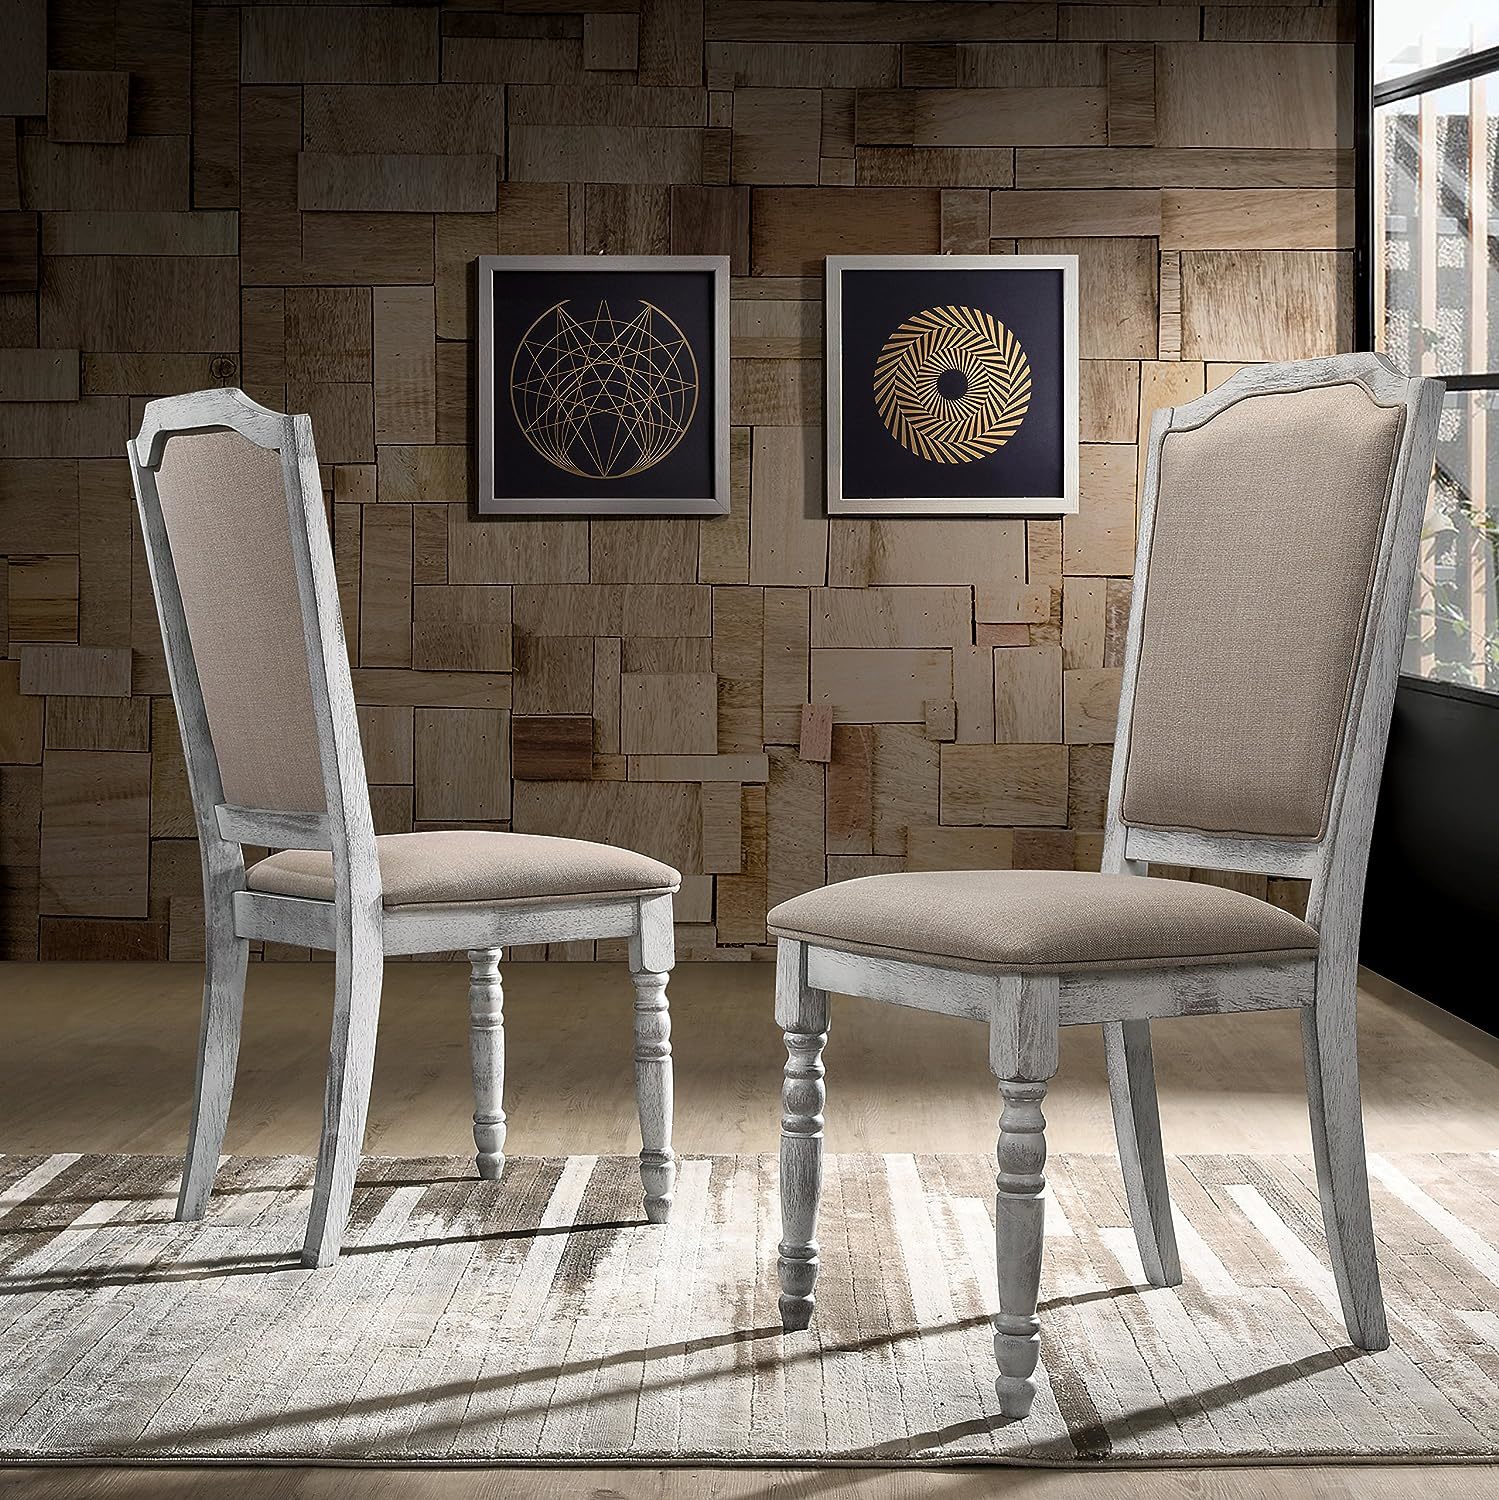 Iris Turned Leg Wood Dining Chairs By Roundhill Furniture, Set, Weathered White. - $173.96